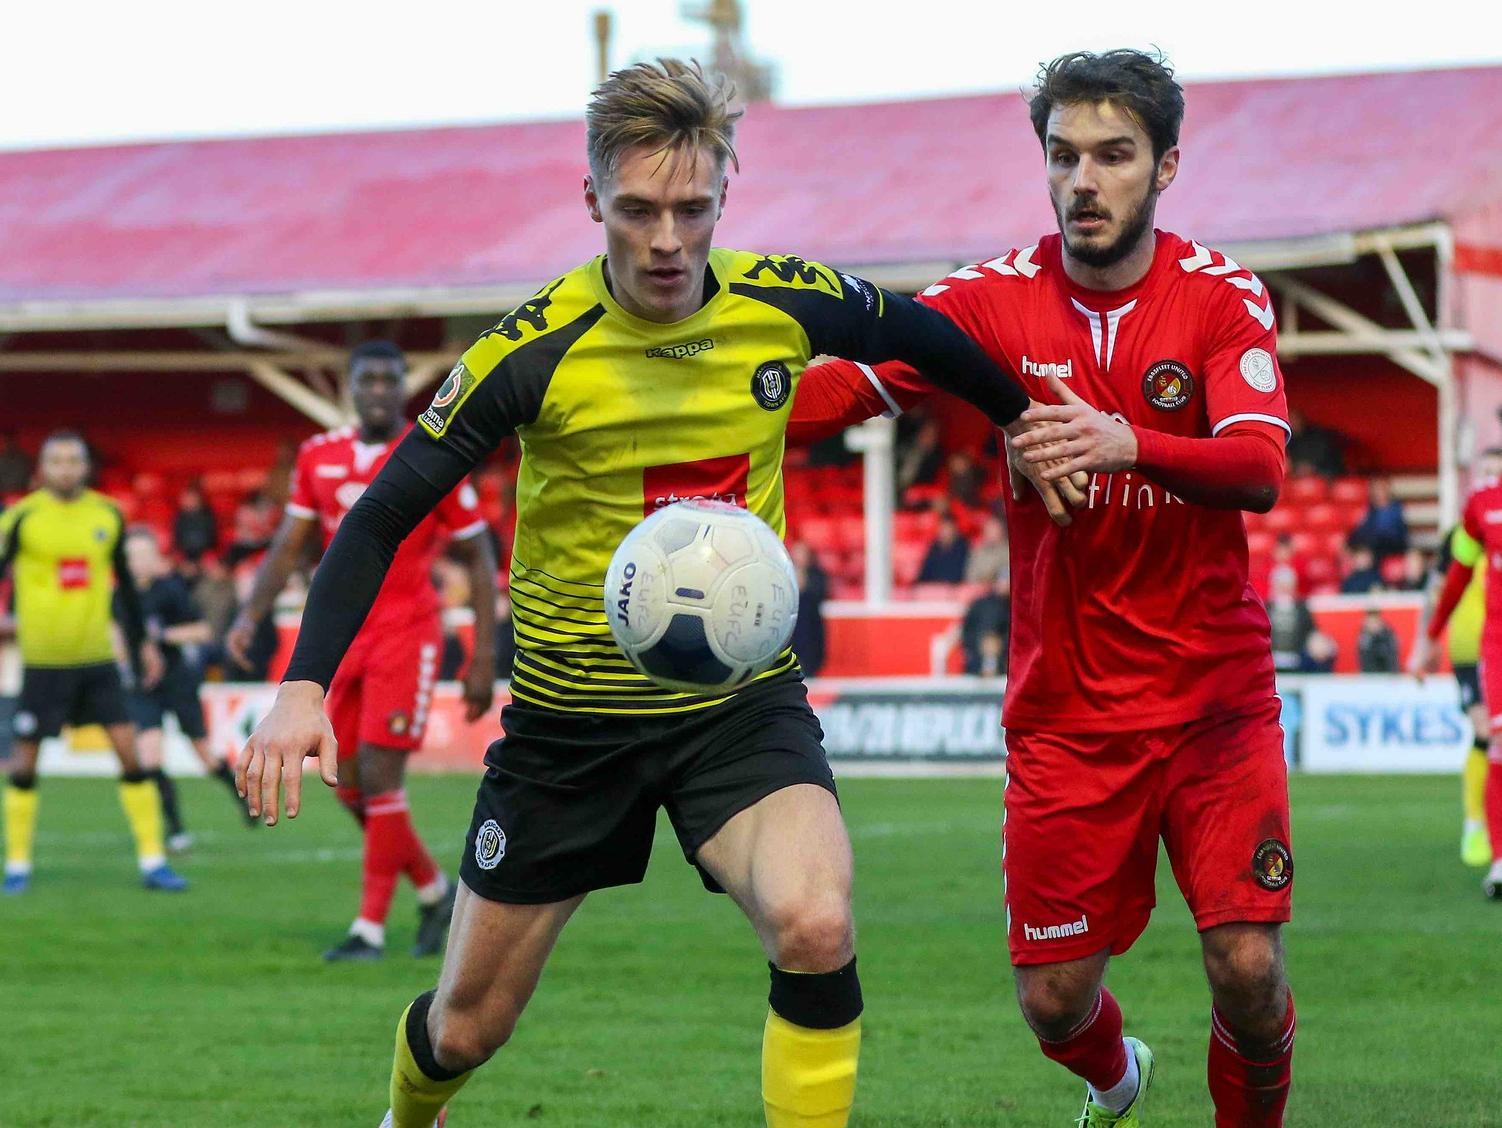 Alex Bradley 7. Doubles up as an extra midfielder when Town are on top, such is his comfort on the ball. Caused Ebbsfleet problems with set-piece deliveries.